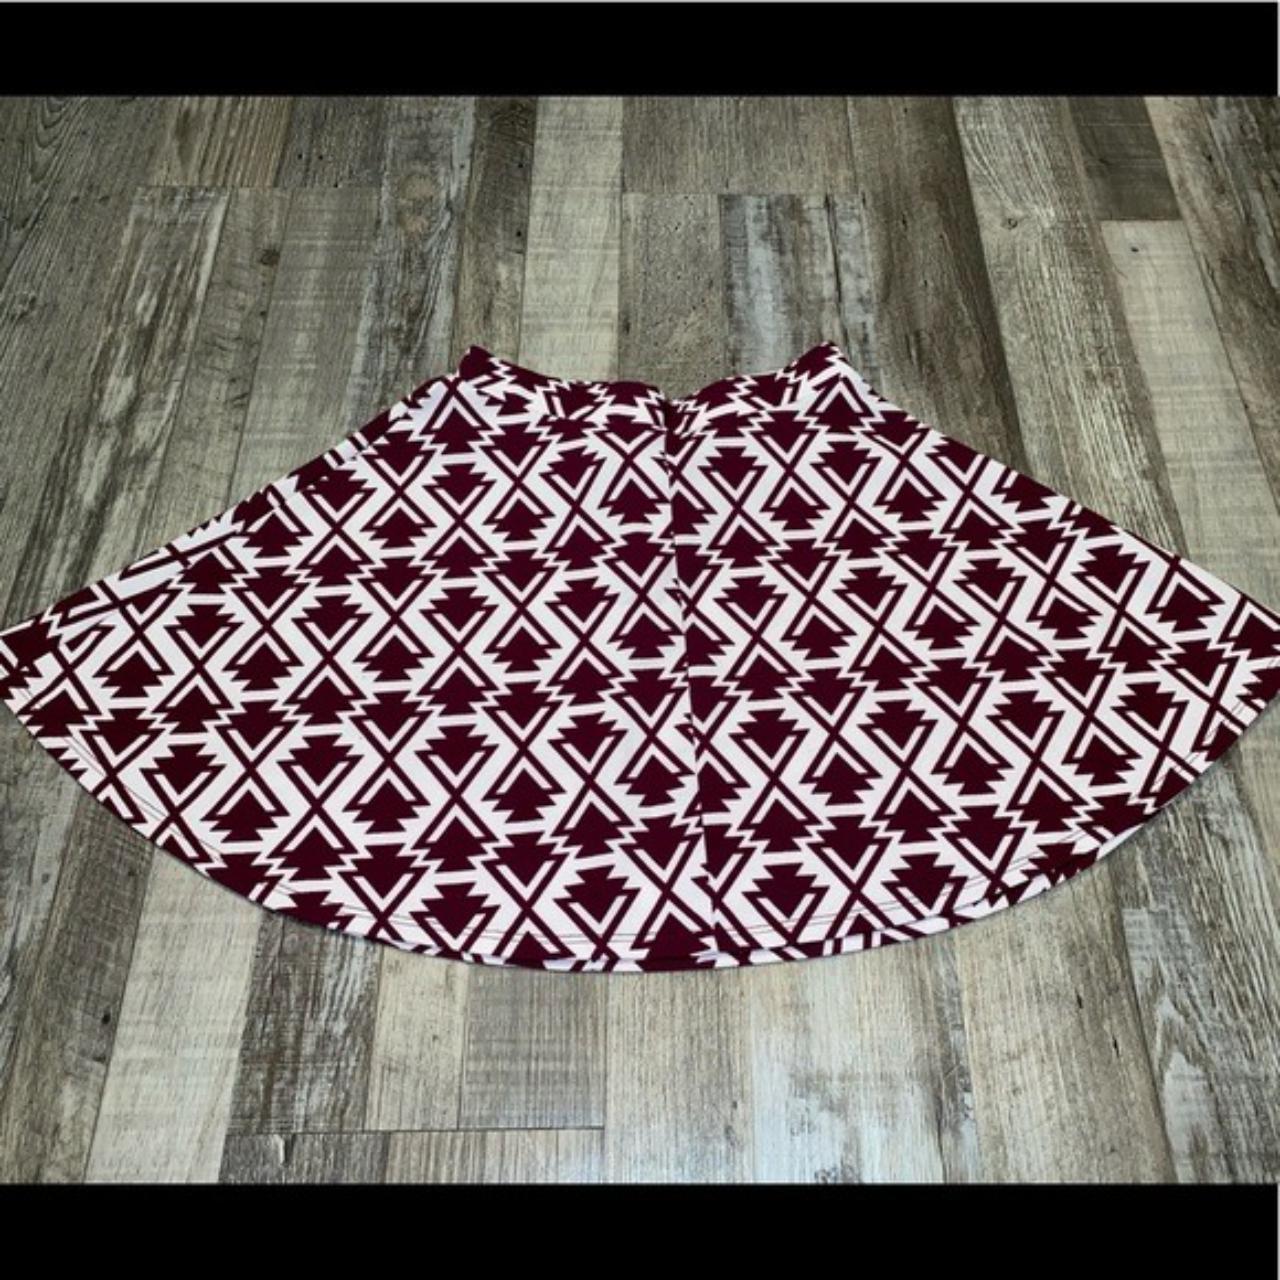 Product Image 2 - empyre skirt

open to bundles and